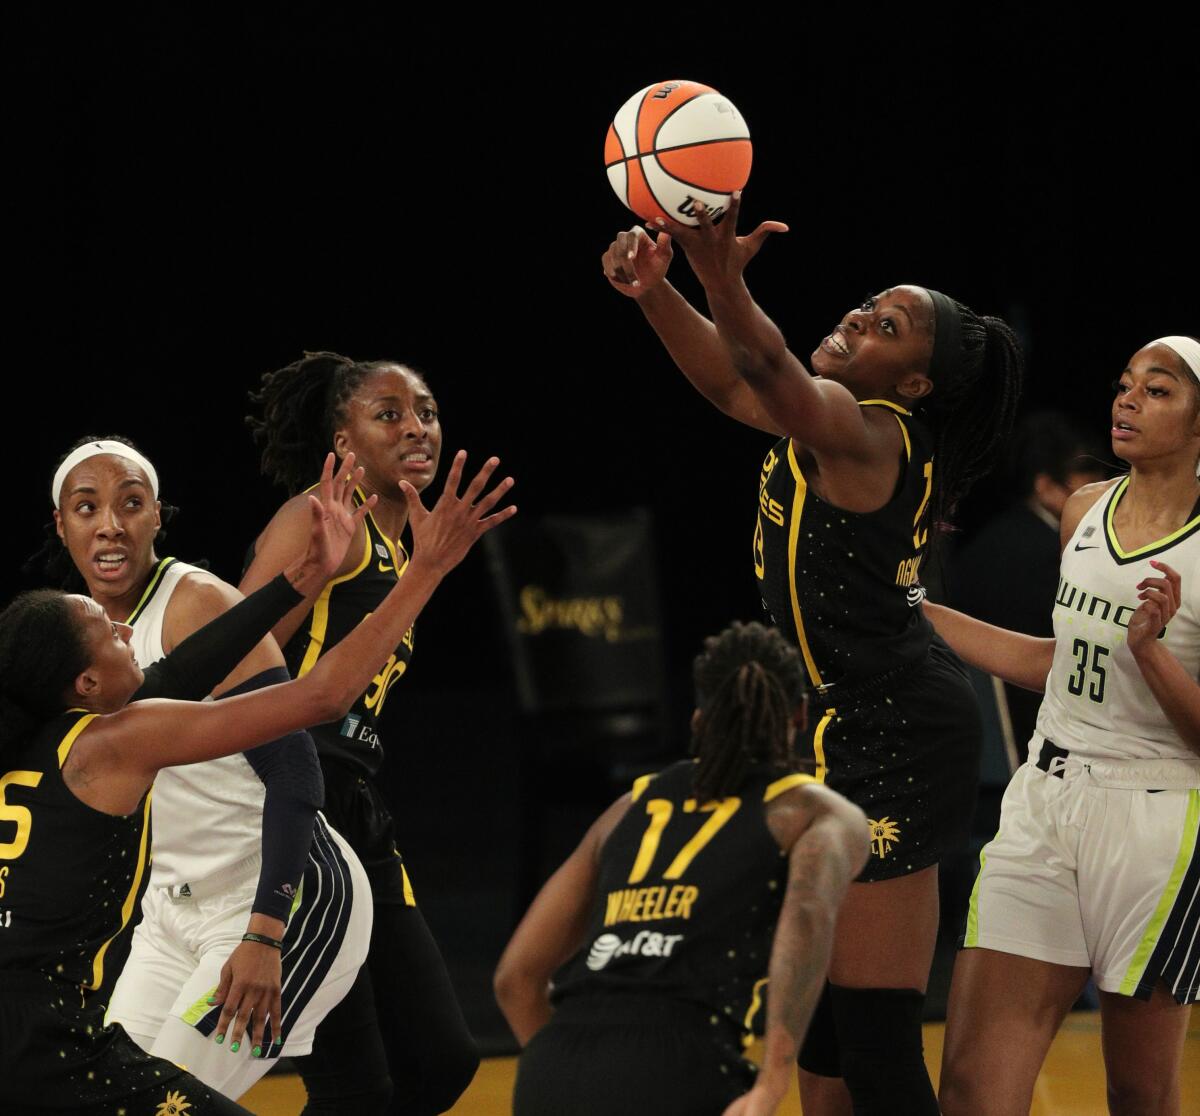 The Sparks' Chiney Ogwumike grabs a defensive rebound in front of the Dallas Wings' Charli Collier on May 14, 2021.